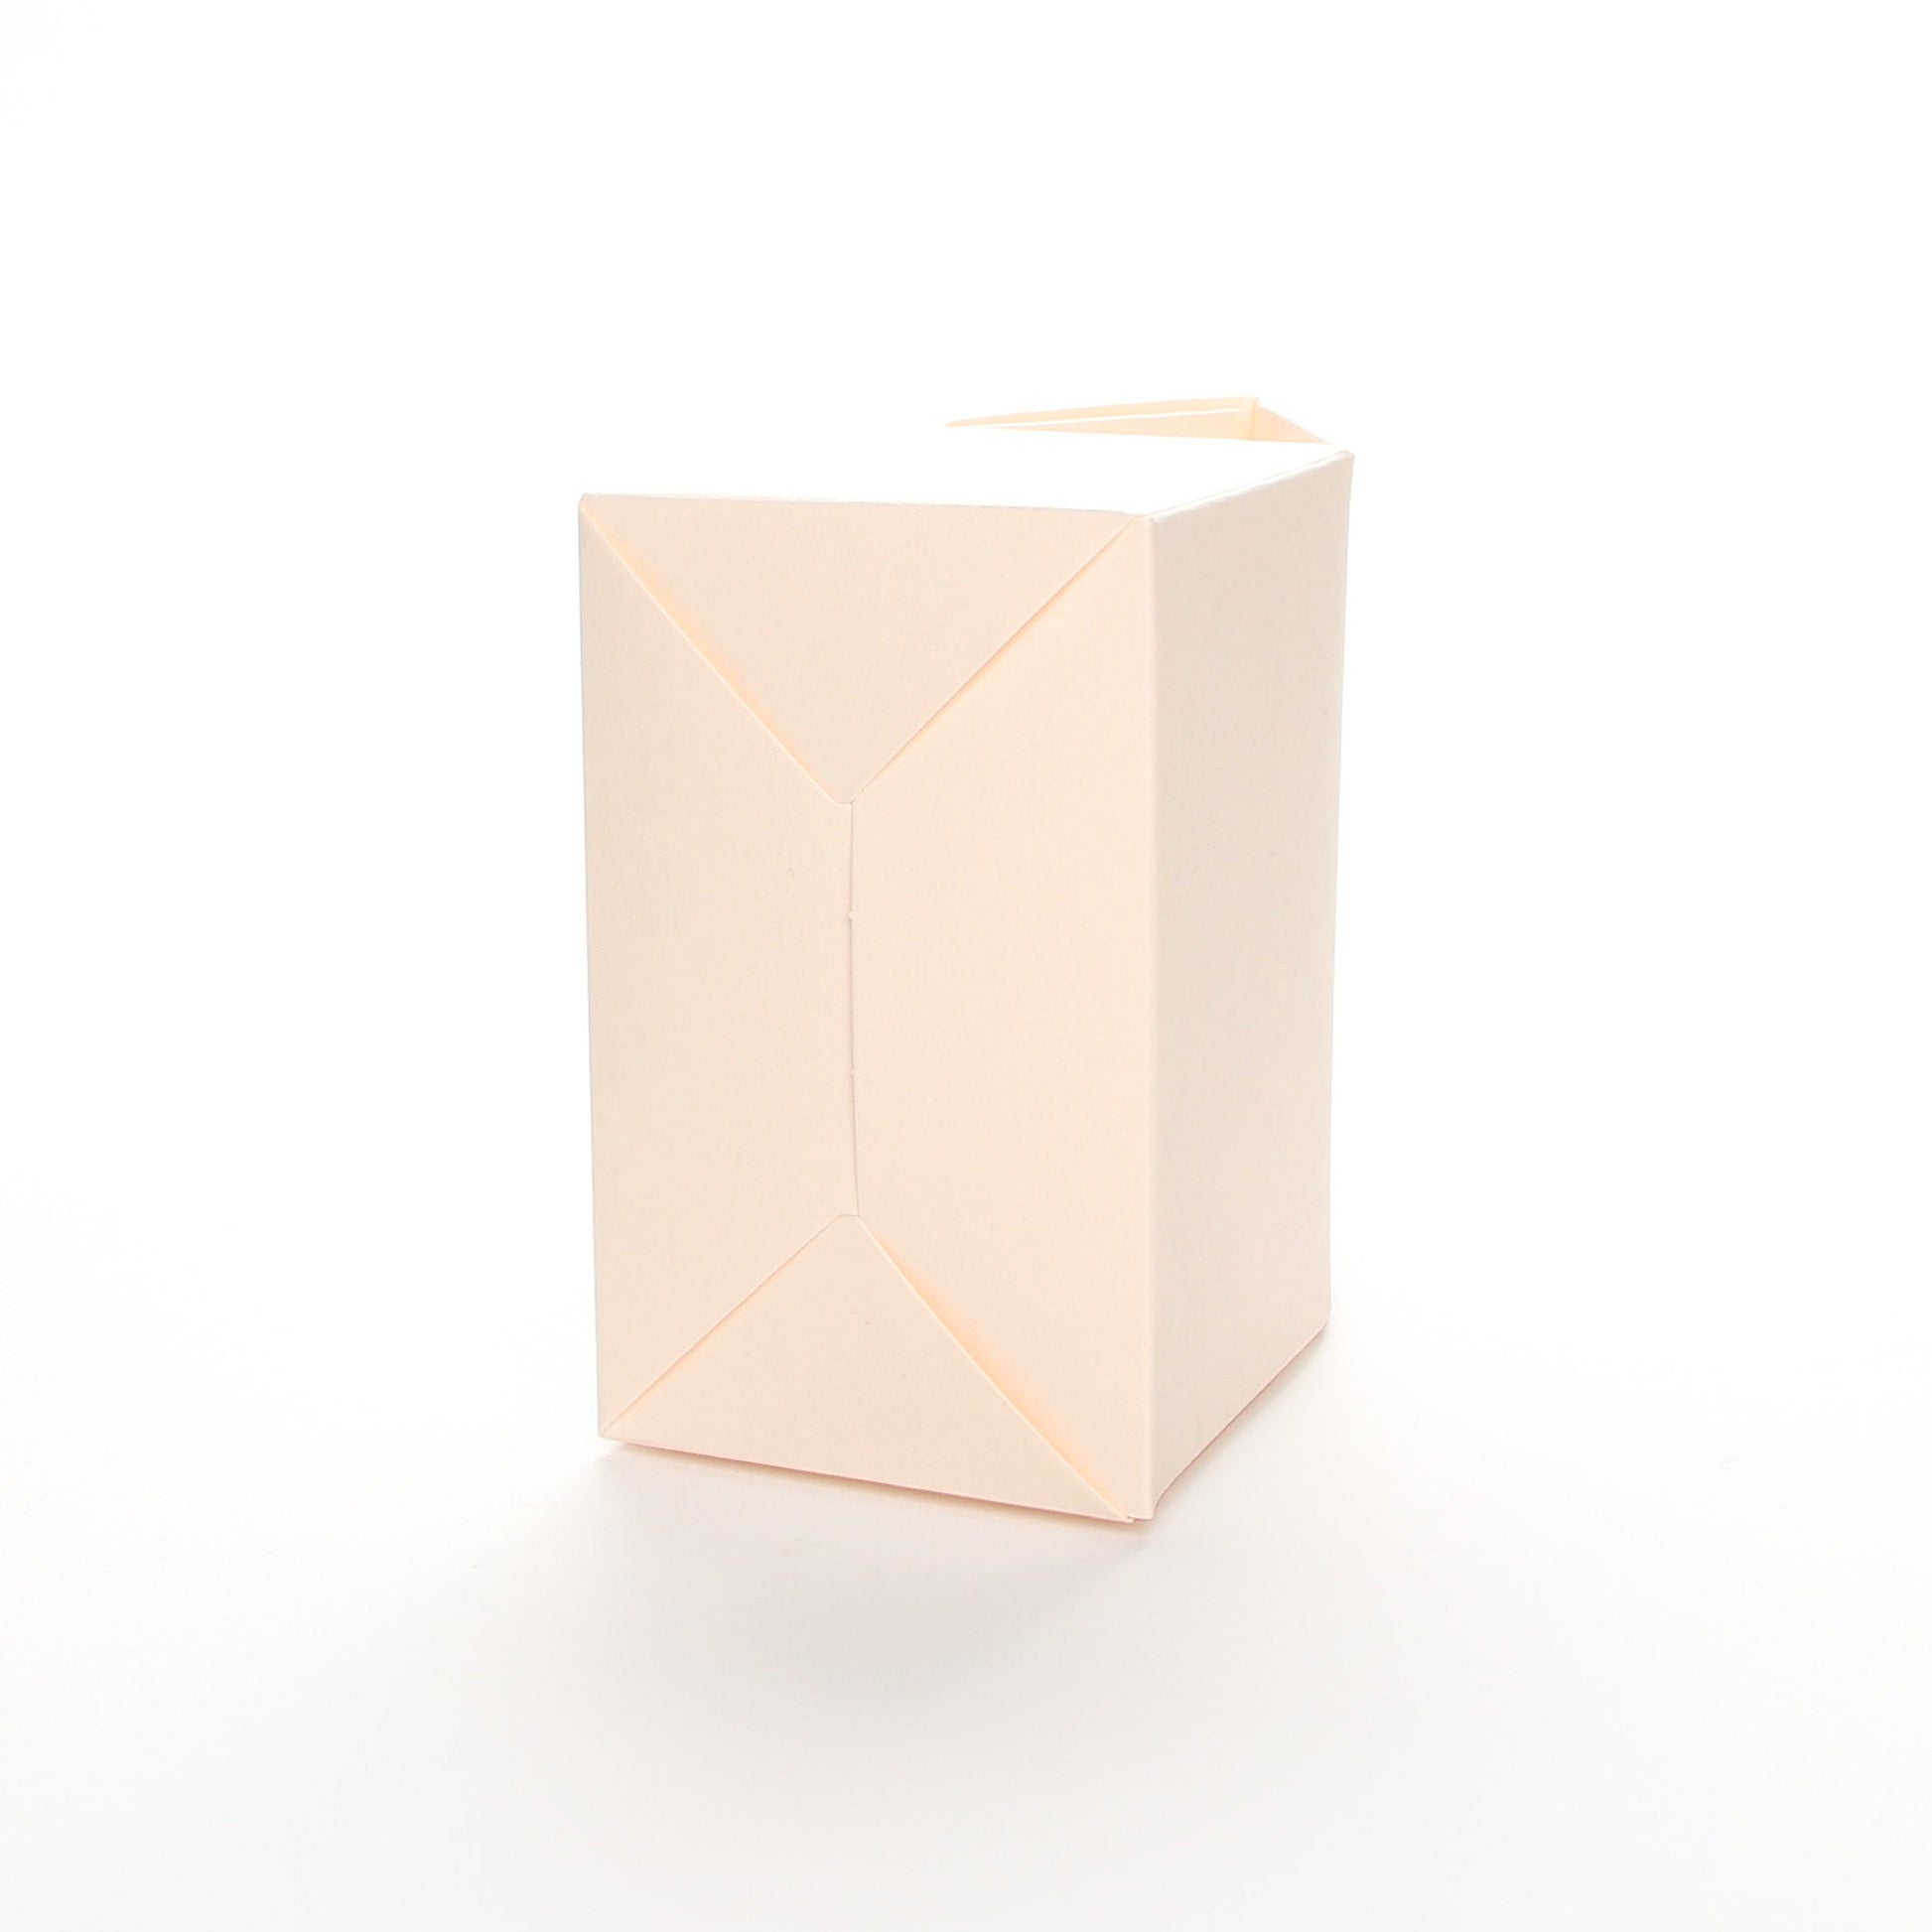 Bottom view of Lux Party’s pink favor box on a white background.